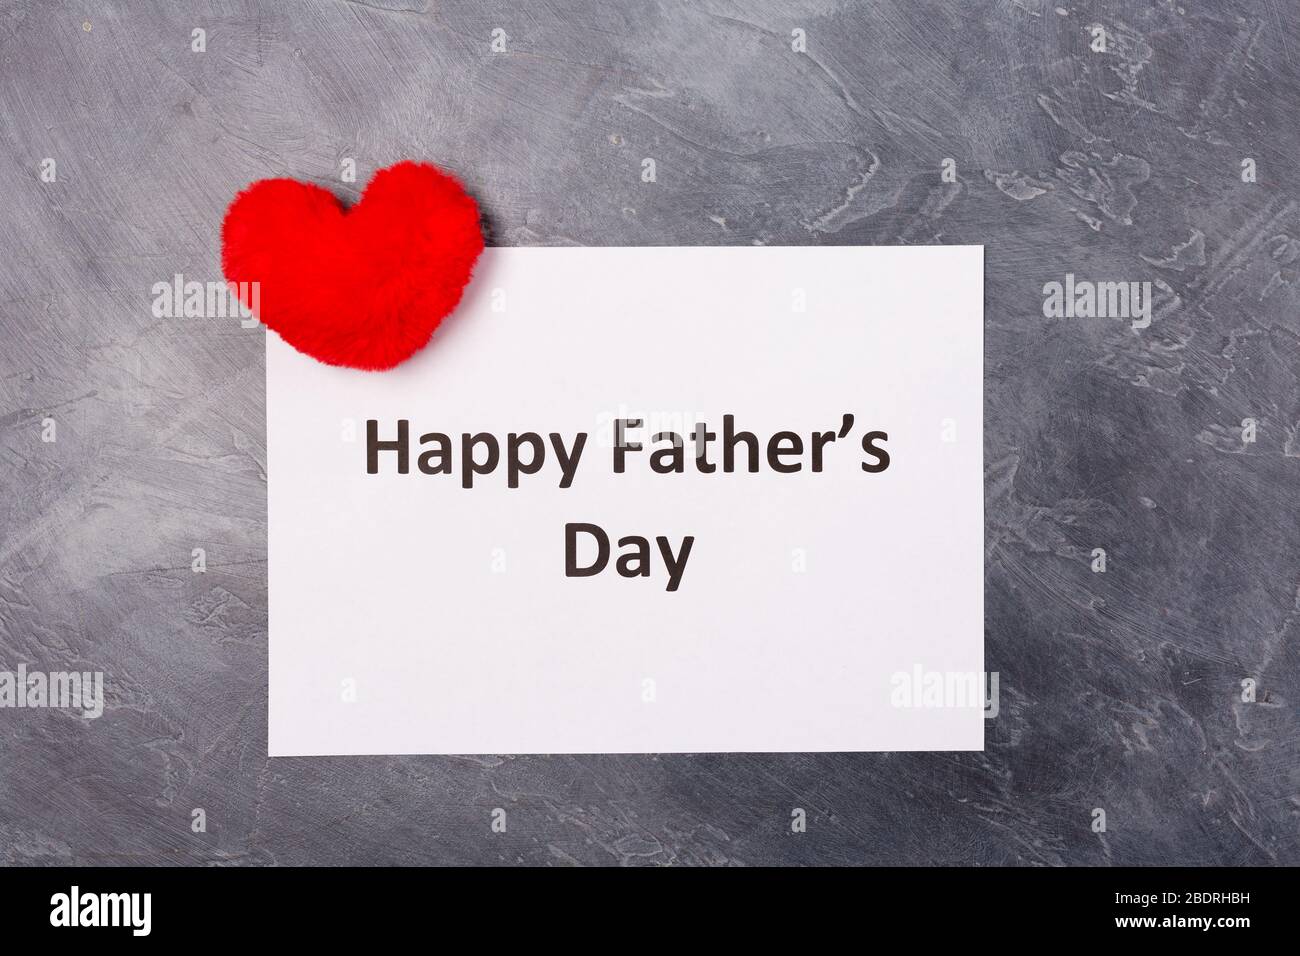 Happy Father's Day text on grey background with red heart. Free space. Space for text. Father's day holiday concept.  Stock Photo